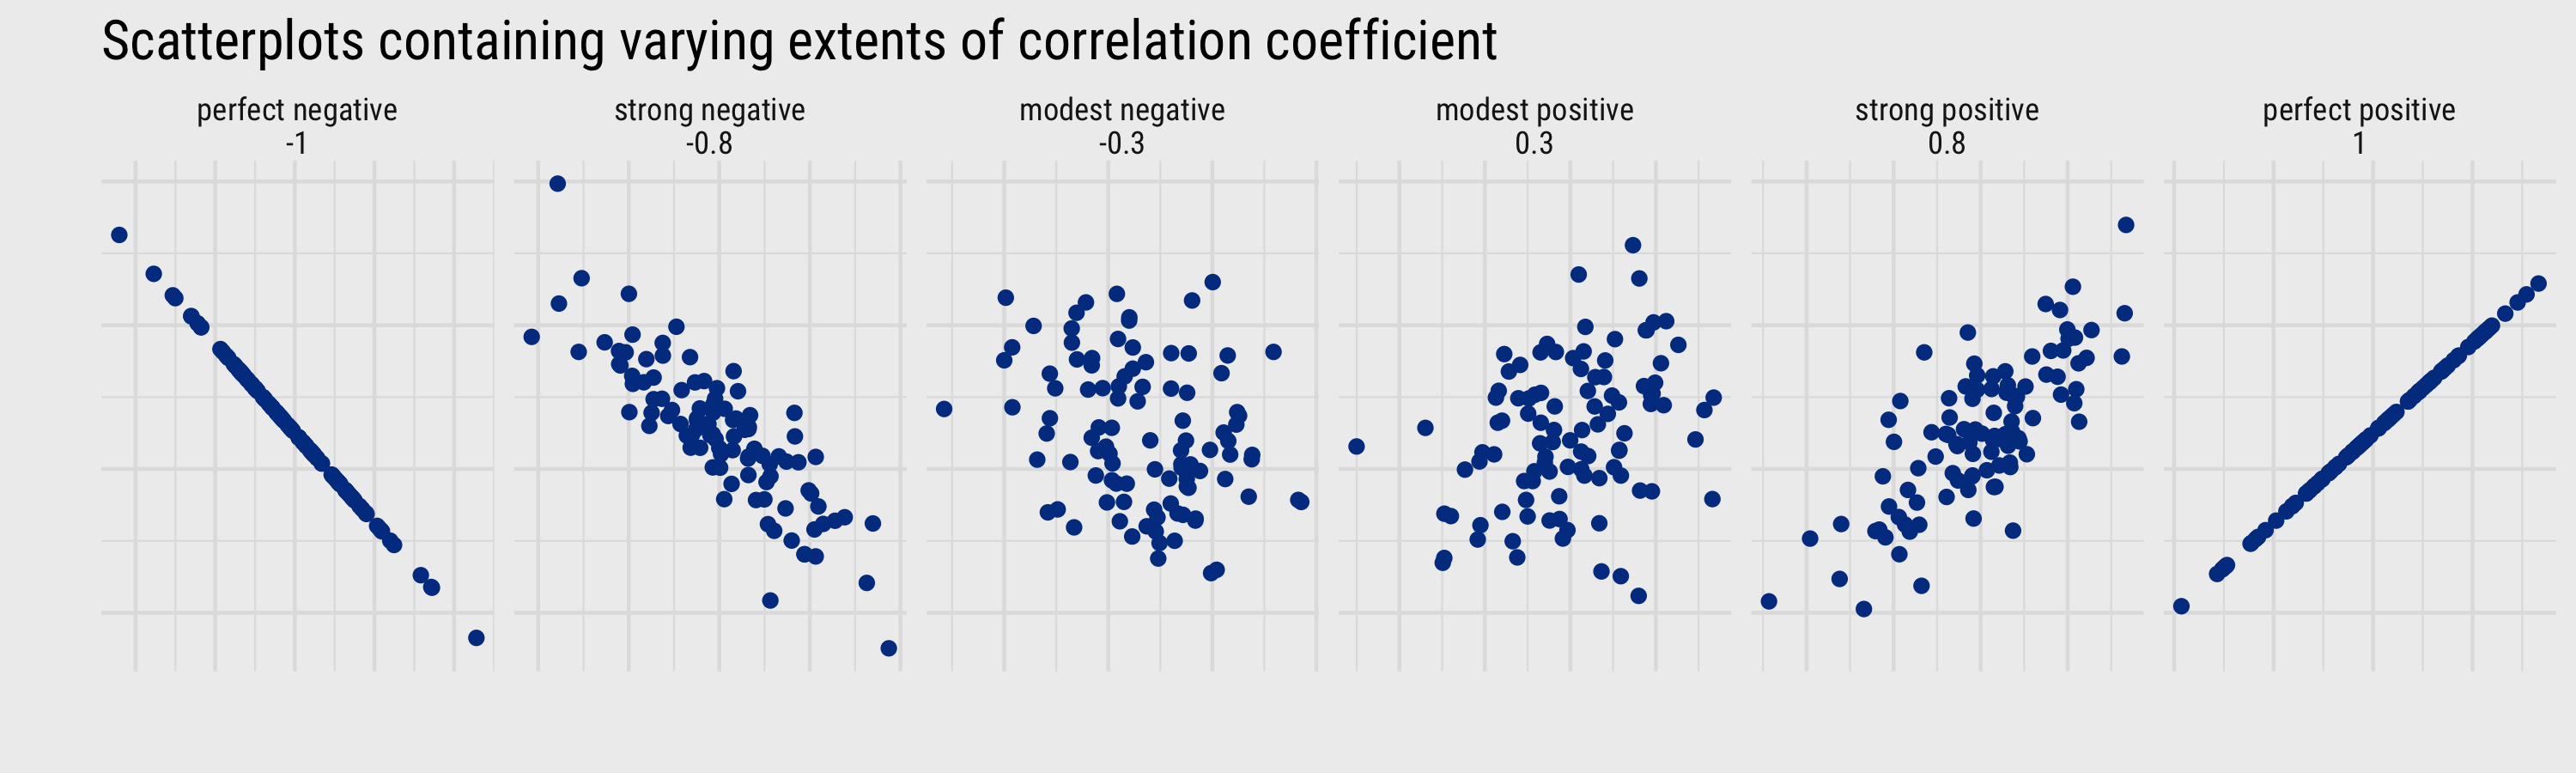 Scatterplots of synthetic bivariate data with extent of correlation coefficient systematically varied.